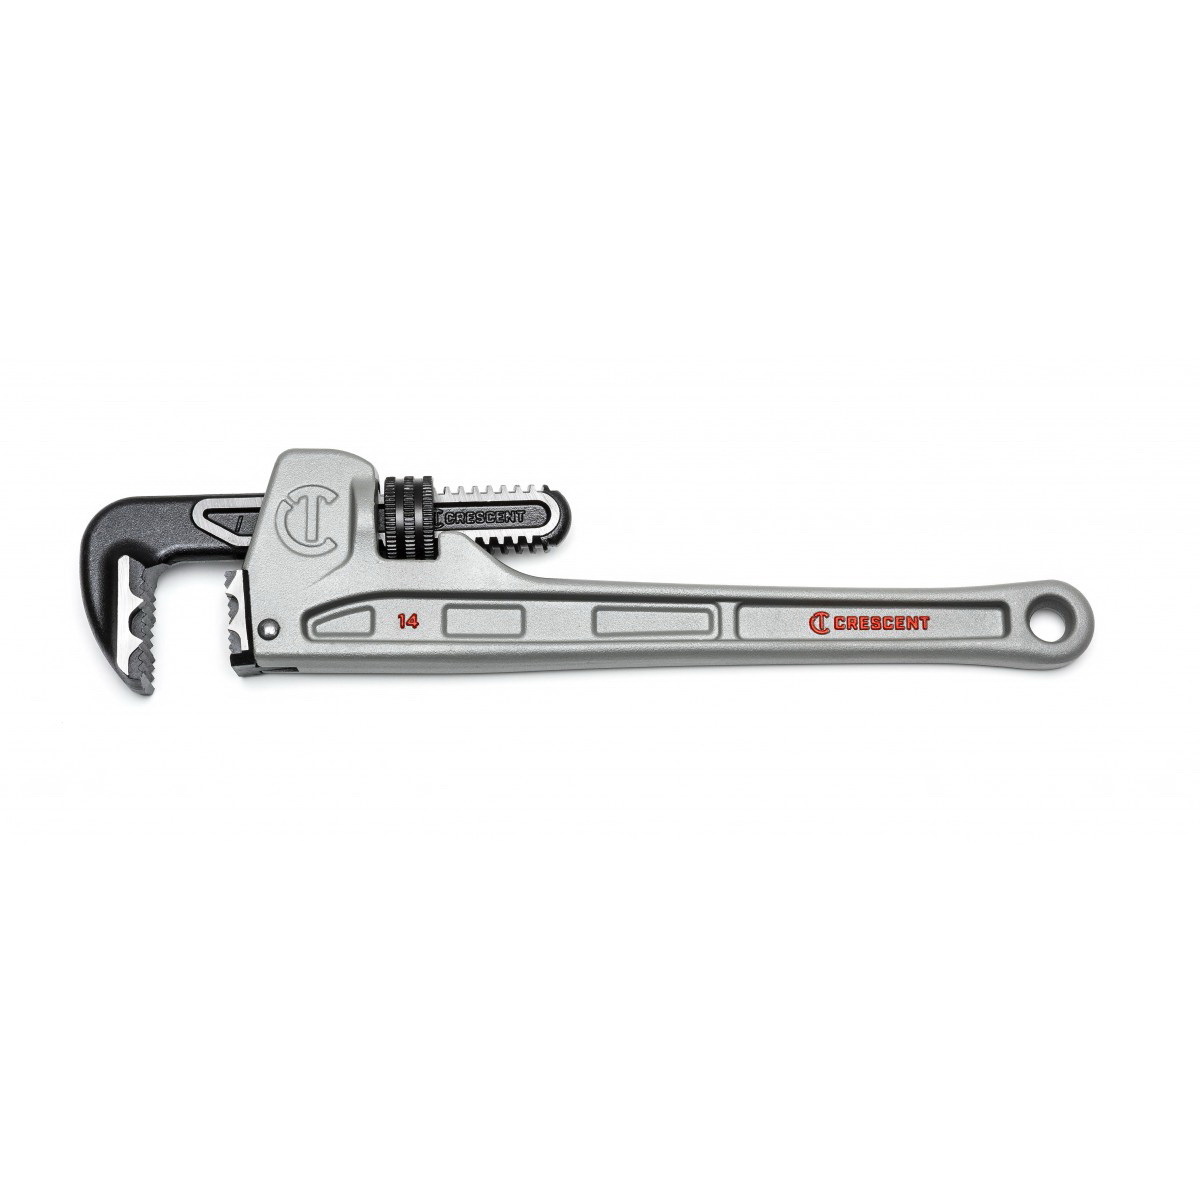 Crescent CAPW14 Pipe Wrench, 0 to 2-3/8 in Jaw, 14 in L, Aluminum, Powder-Coated